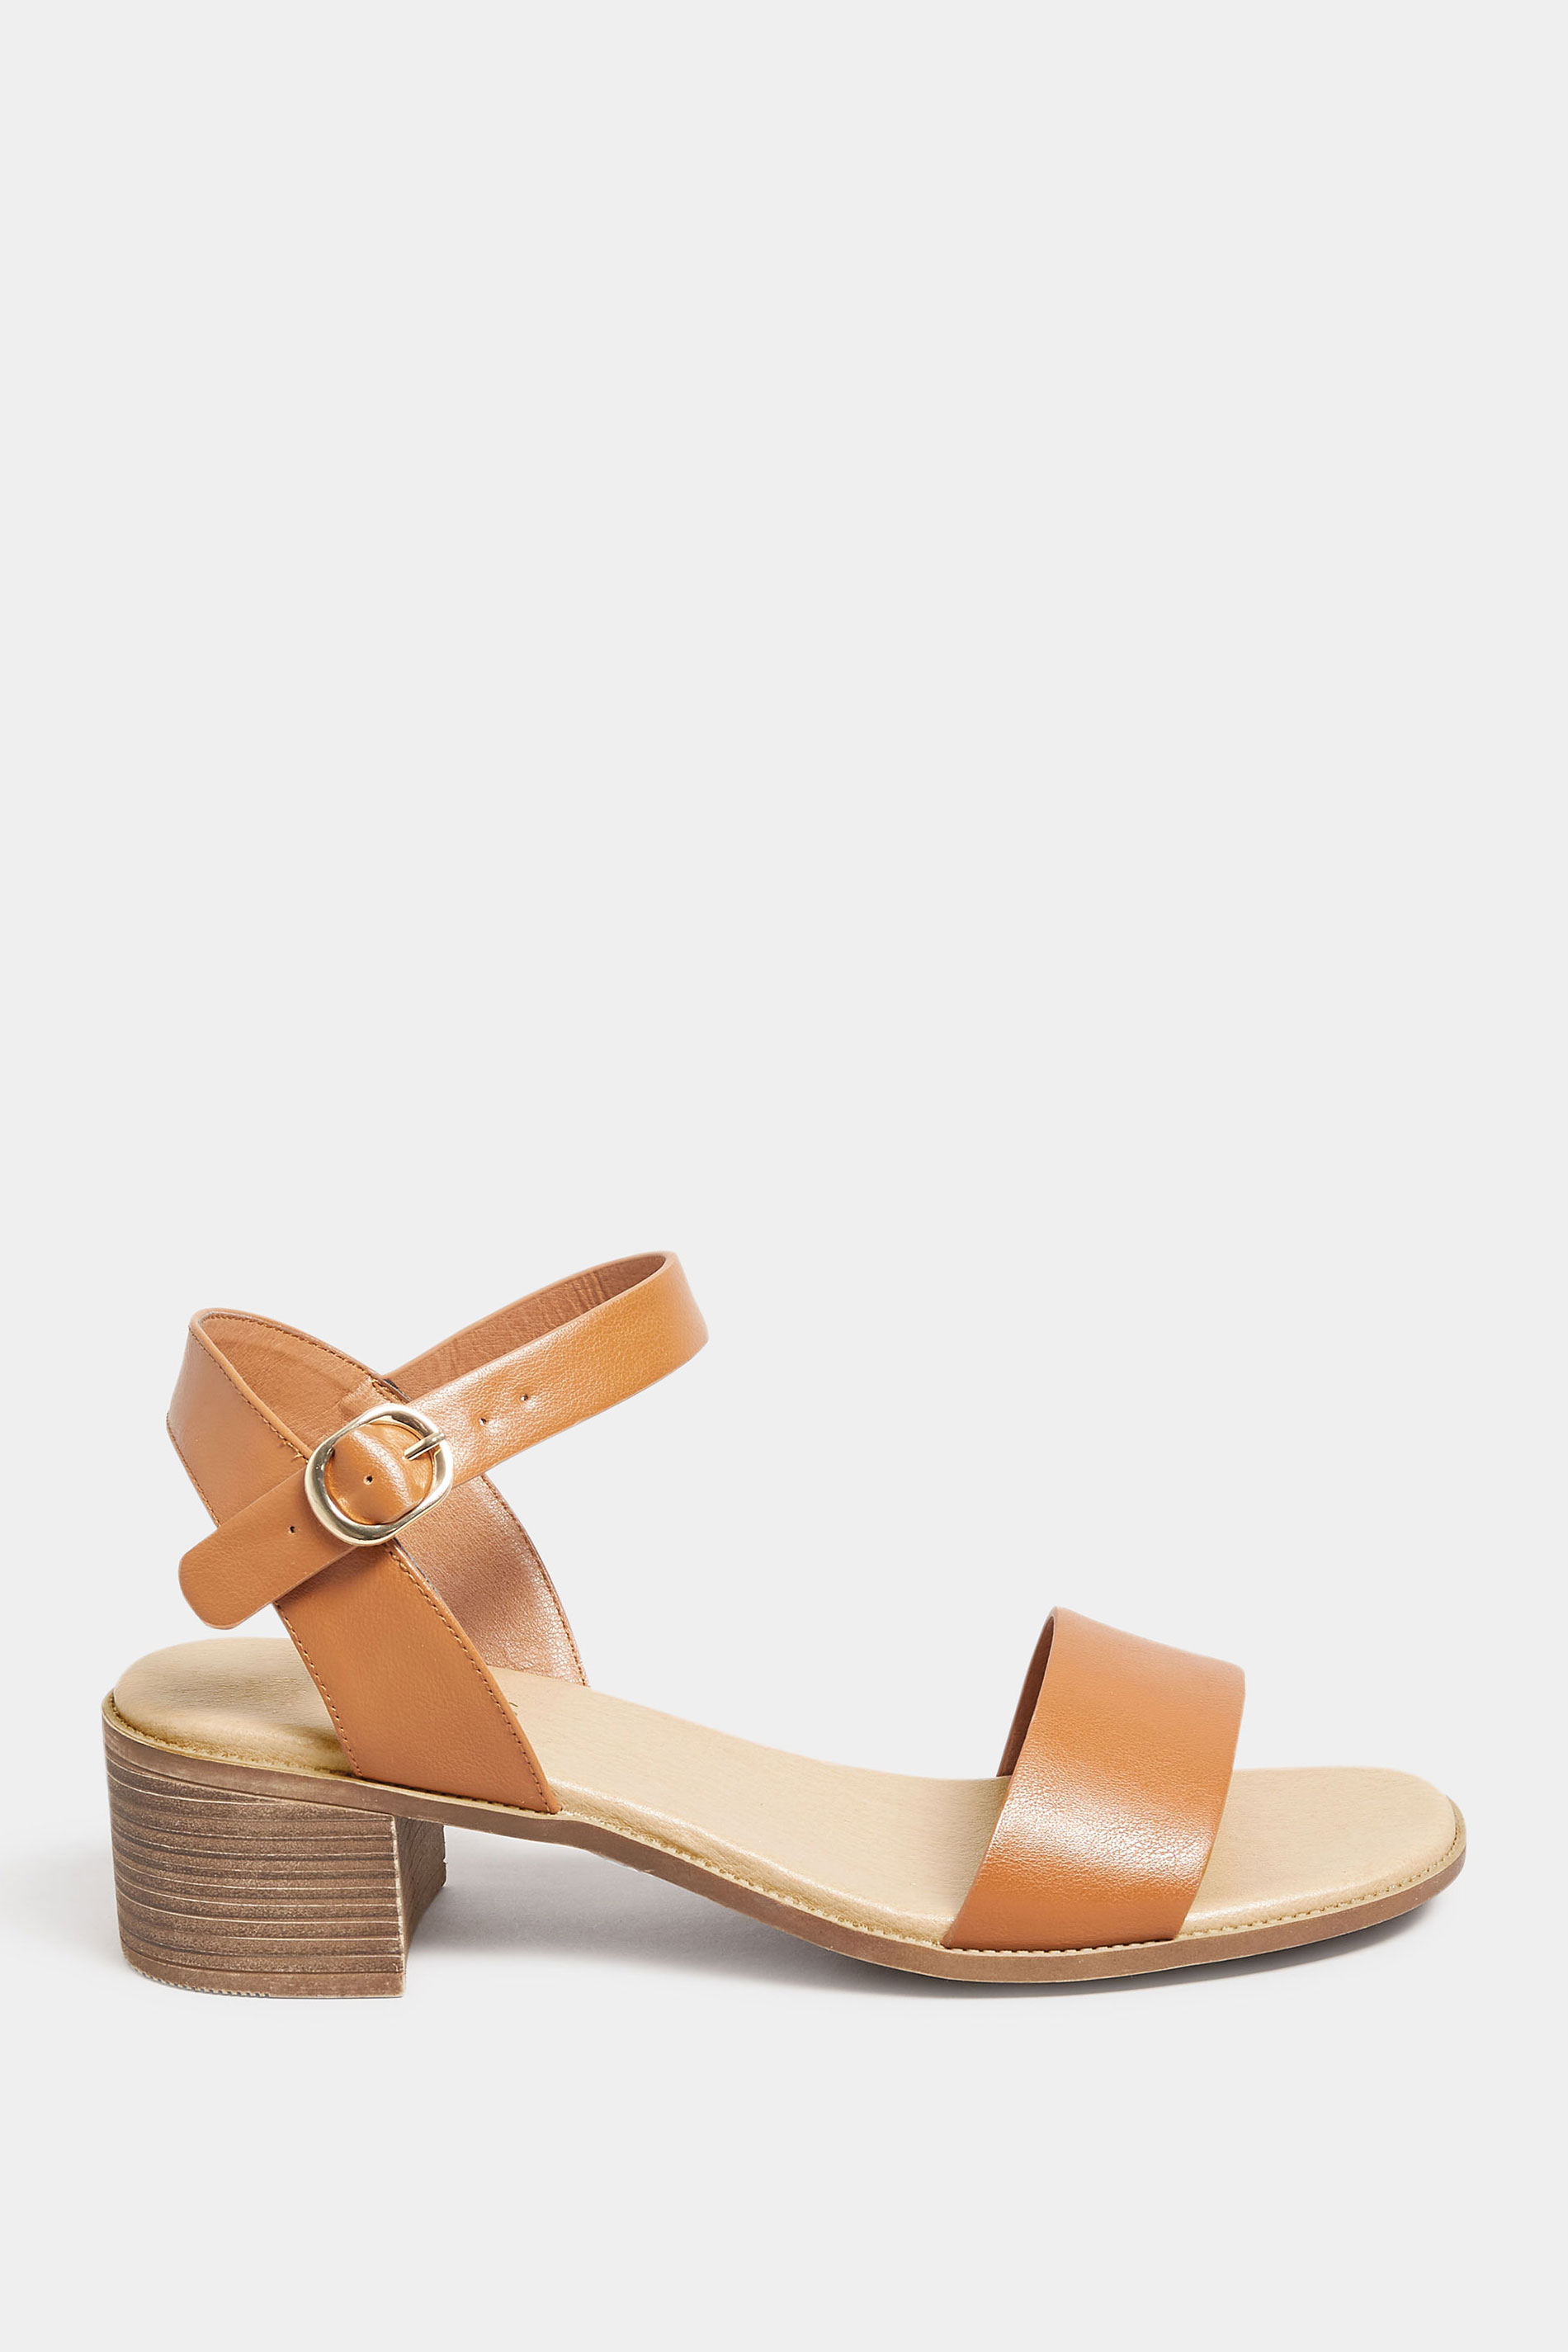 Square Heeled Sandals in Dark Tobacco – Mohawk General Store